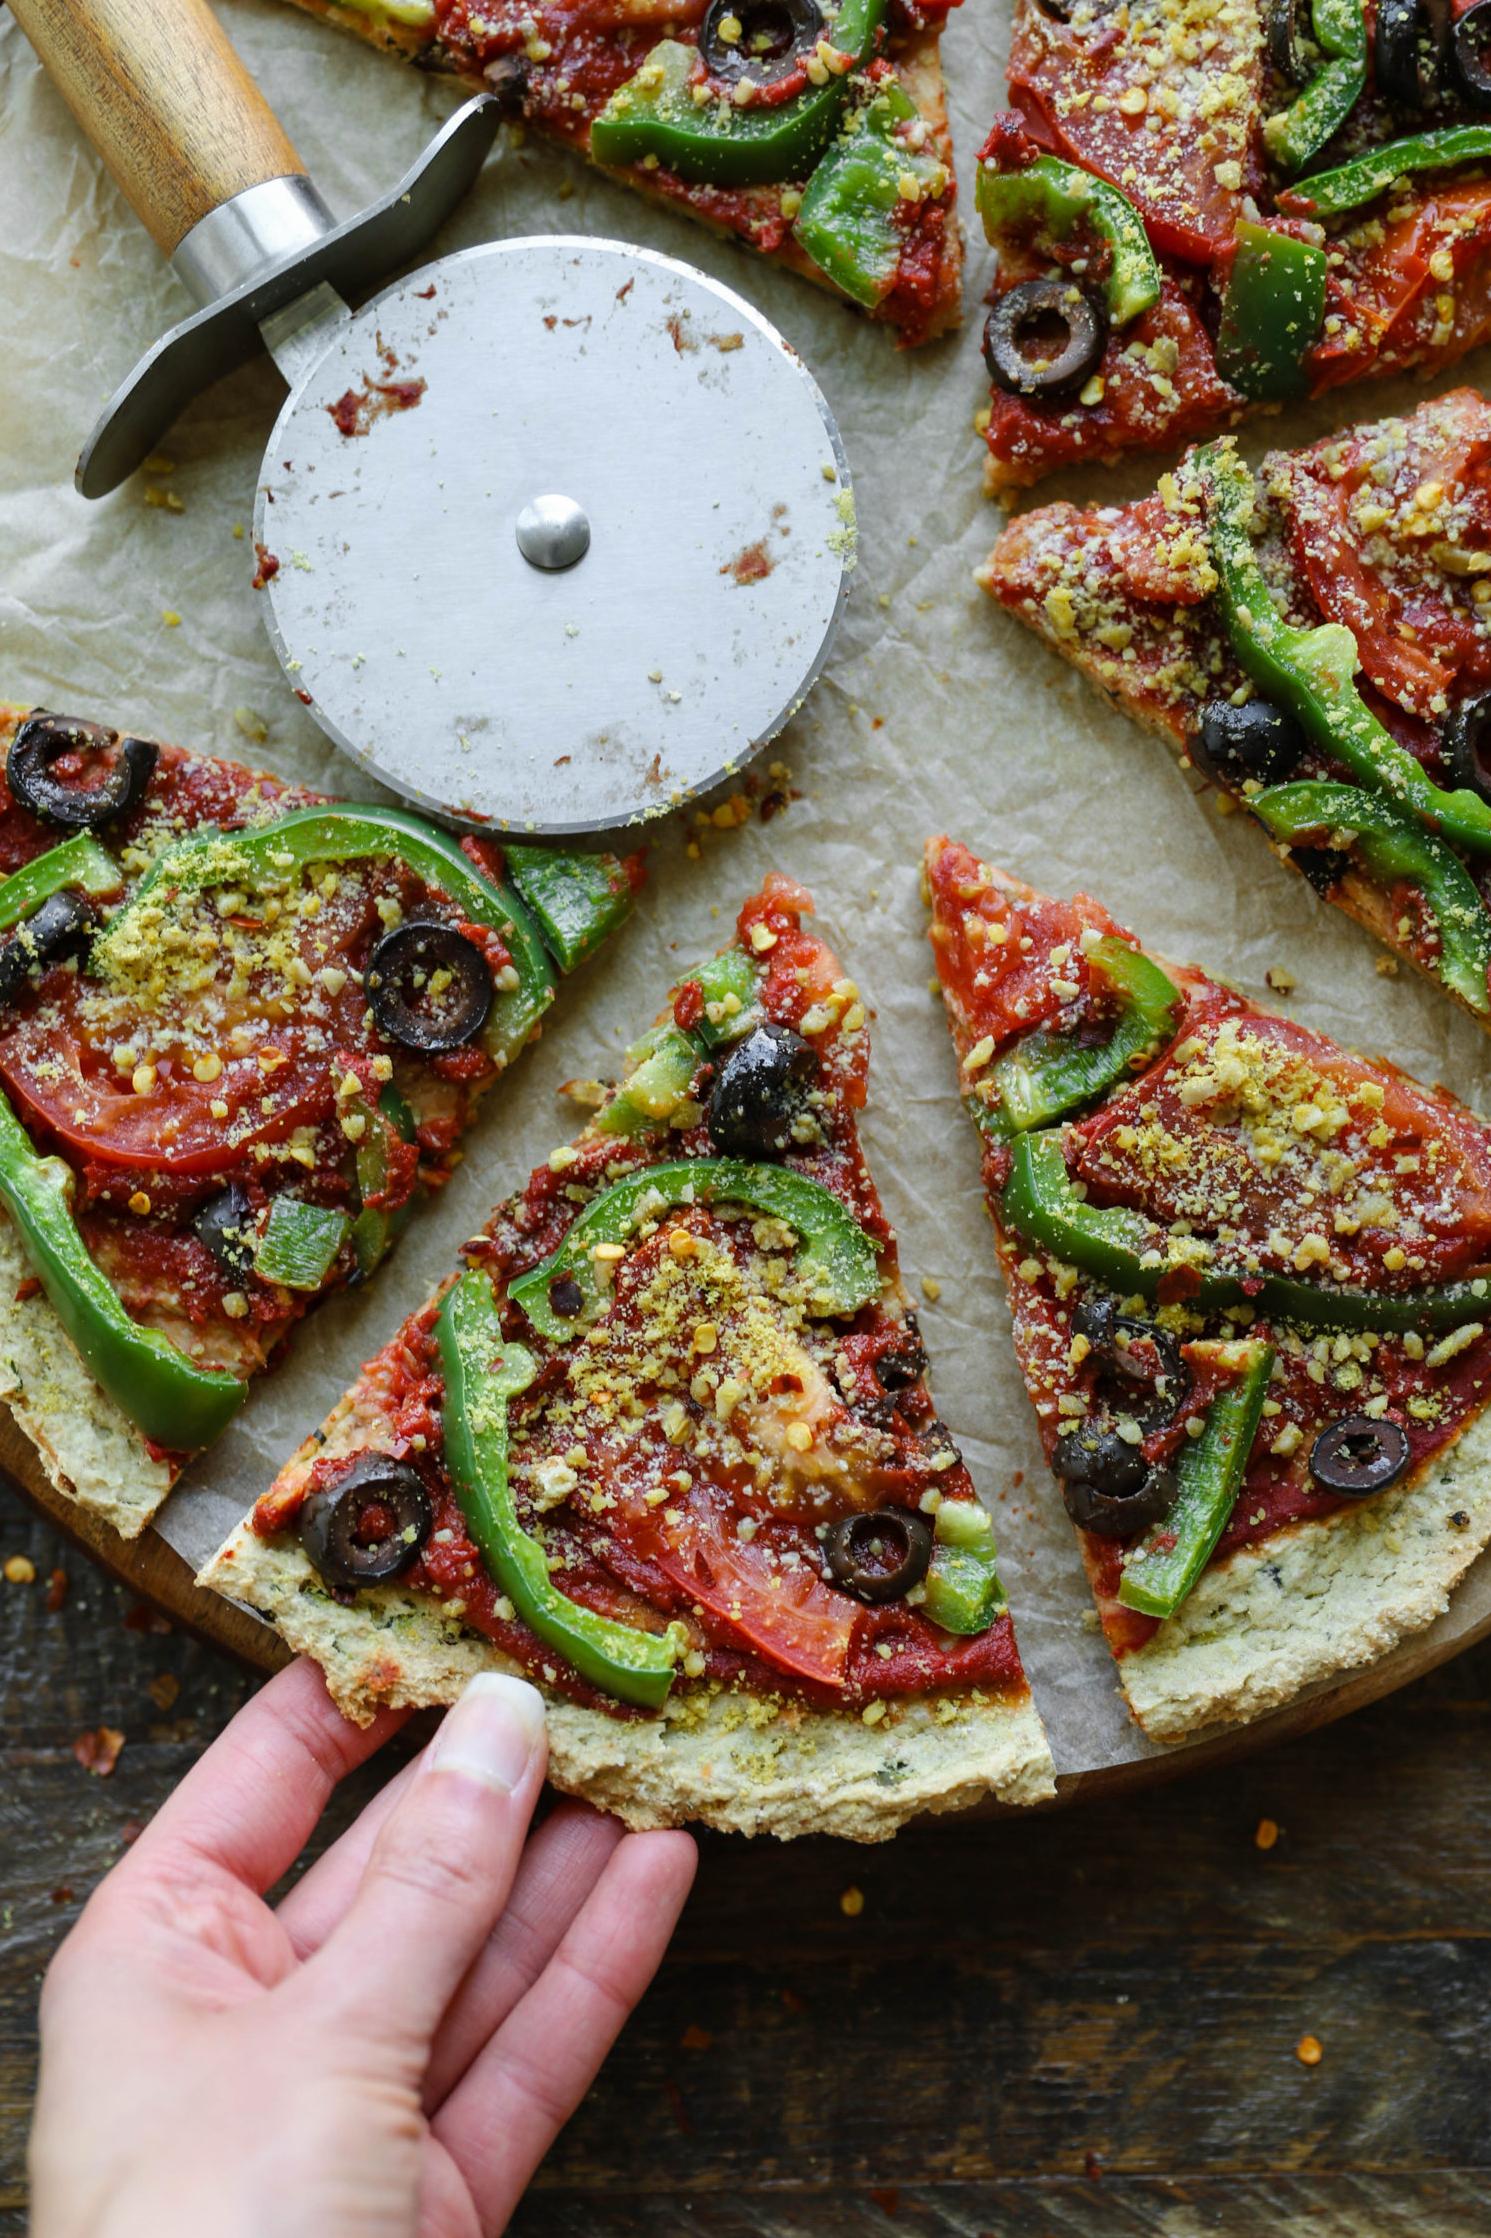  Zucchini makes a great pizza crust: low-carb, gluten-free, and out of this world.